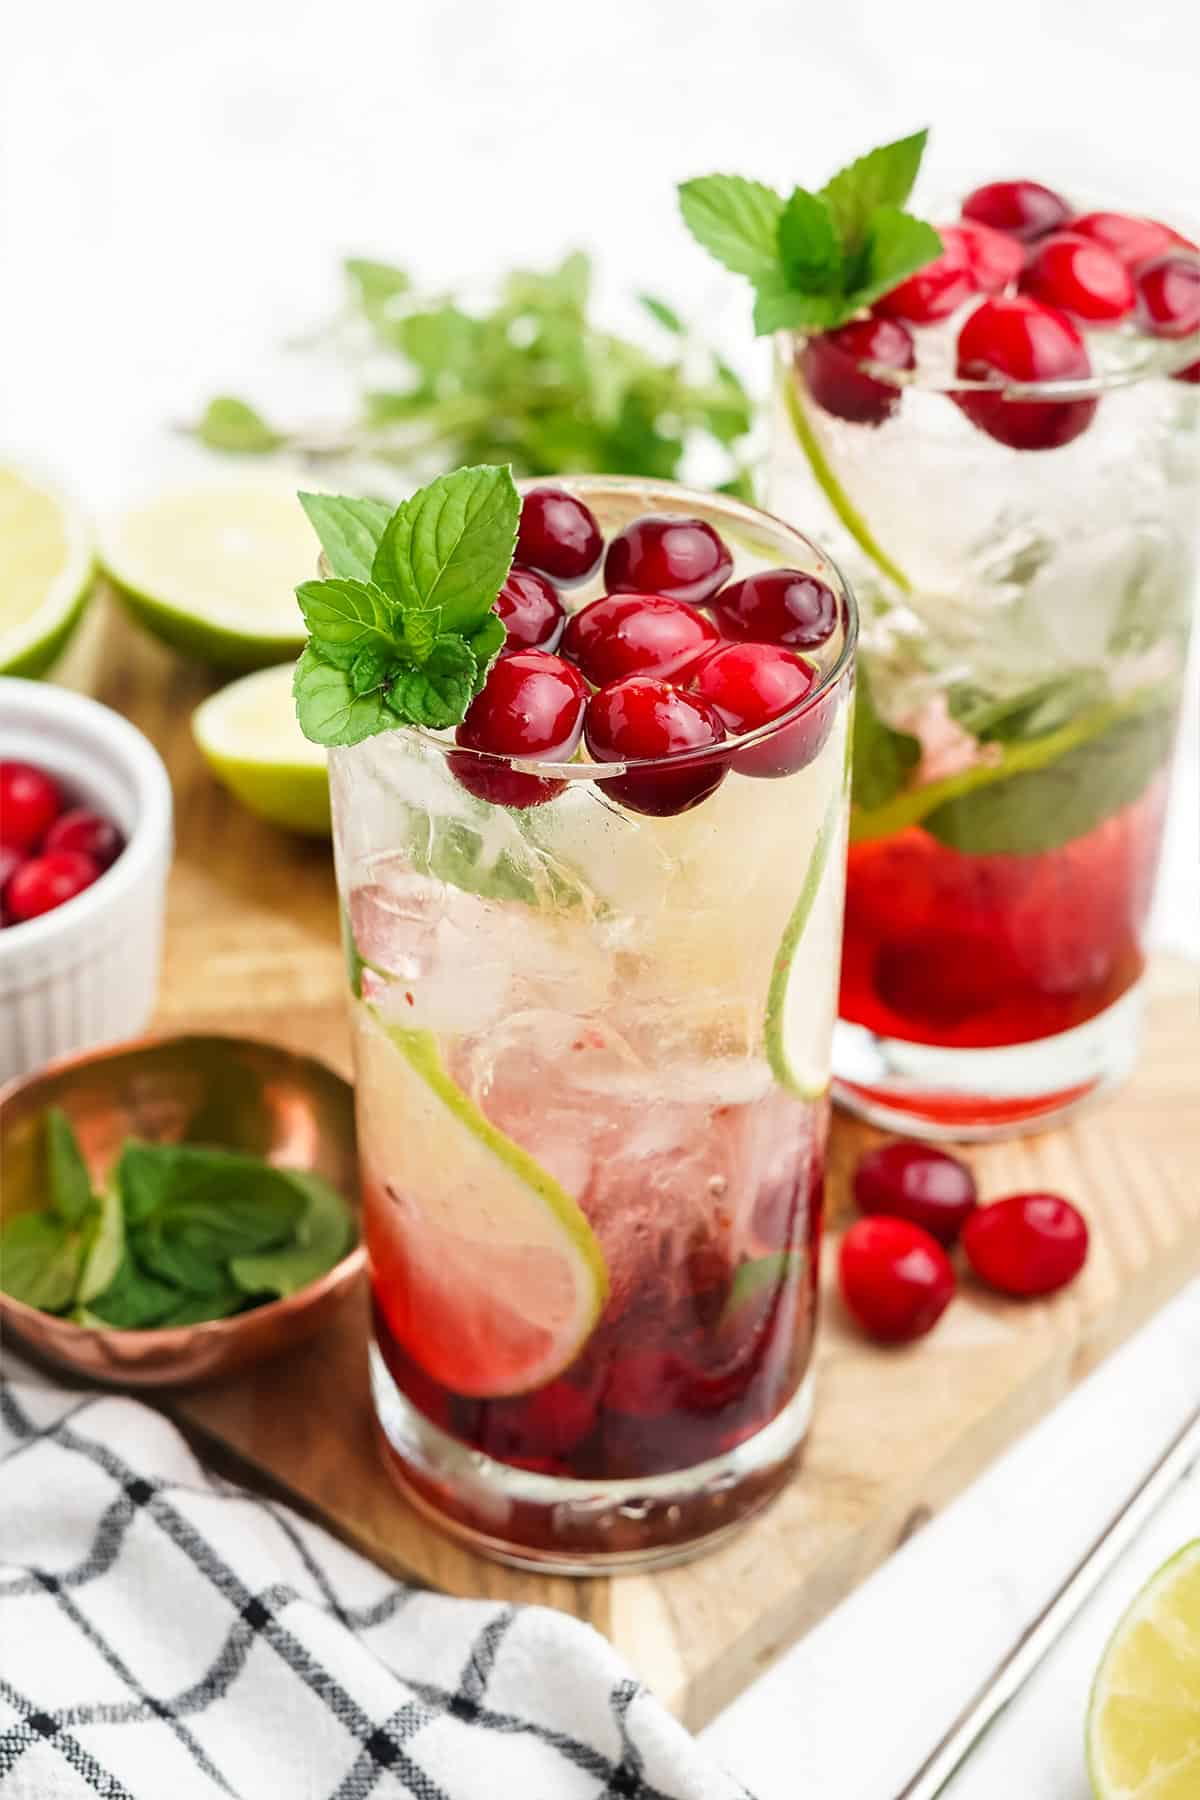 Cranberry mojito in a glass with cranberry syrup on the bottom and lime slices on the glass.